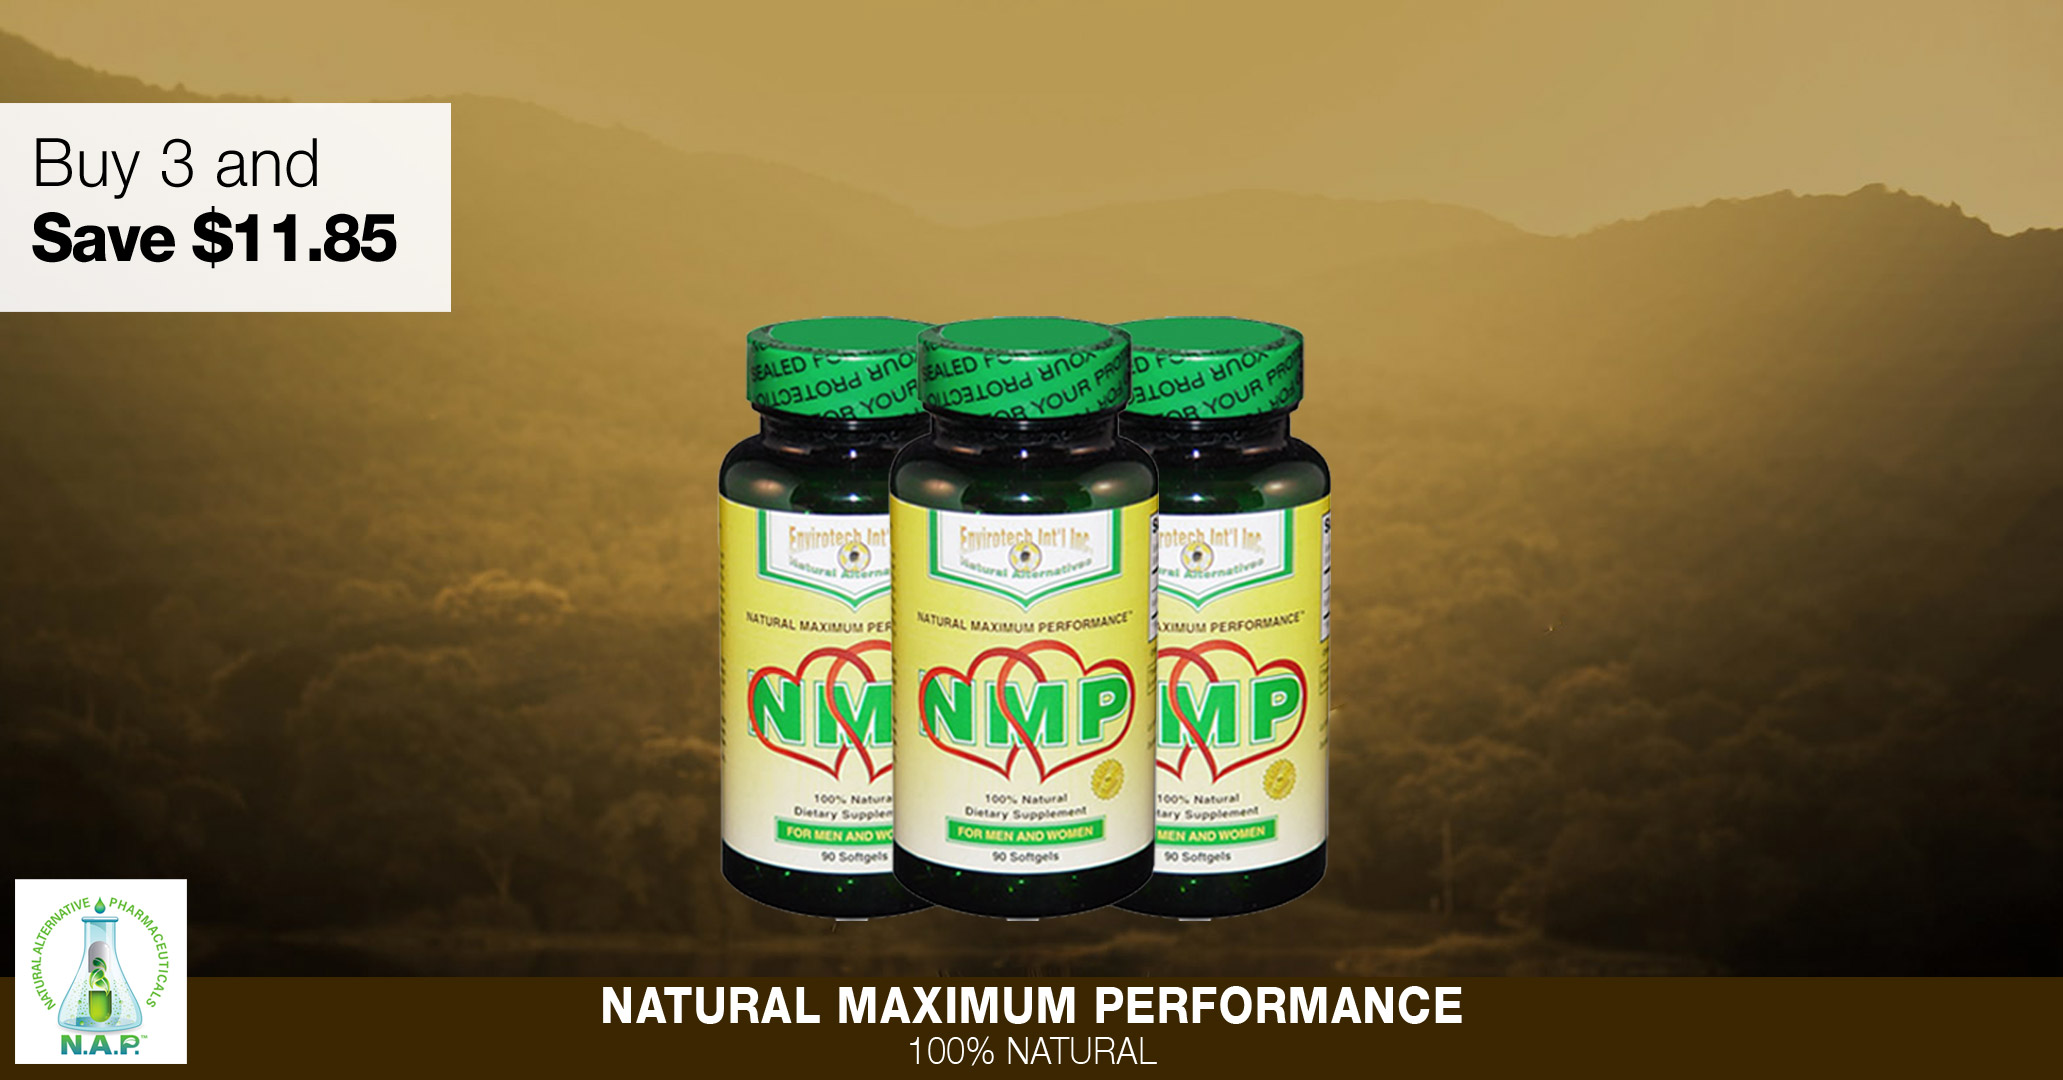 Buy 3 Bottles Of NMP Online And Save $11.85.